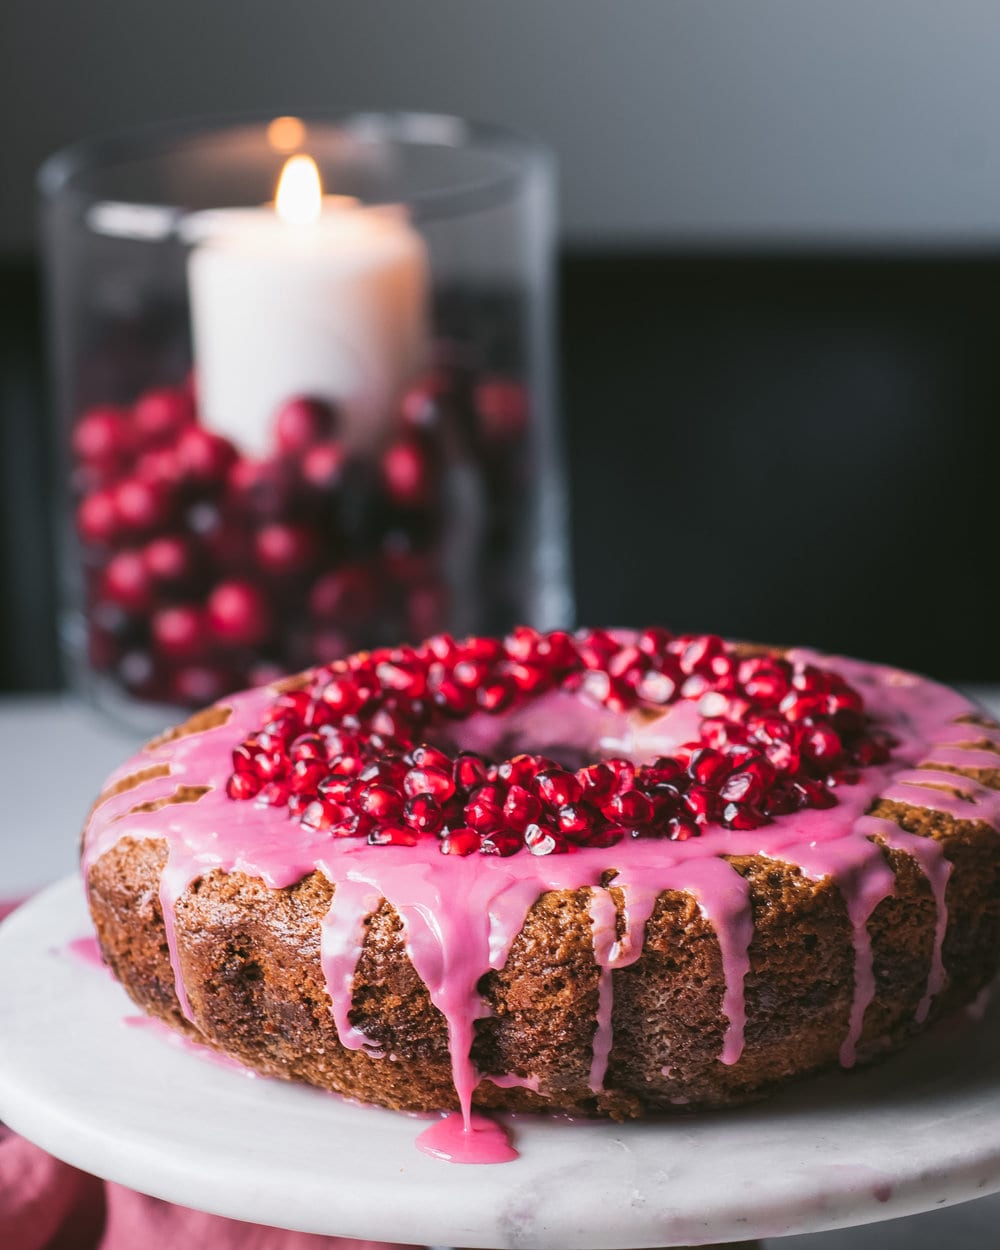 Finished pomegranate cake with pomegranate perils and icing sitting on a white cake stand.